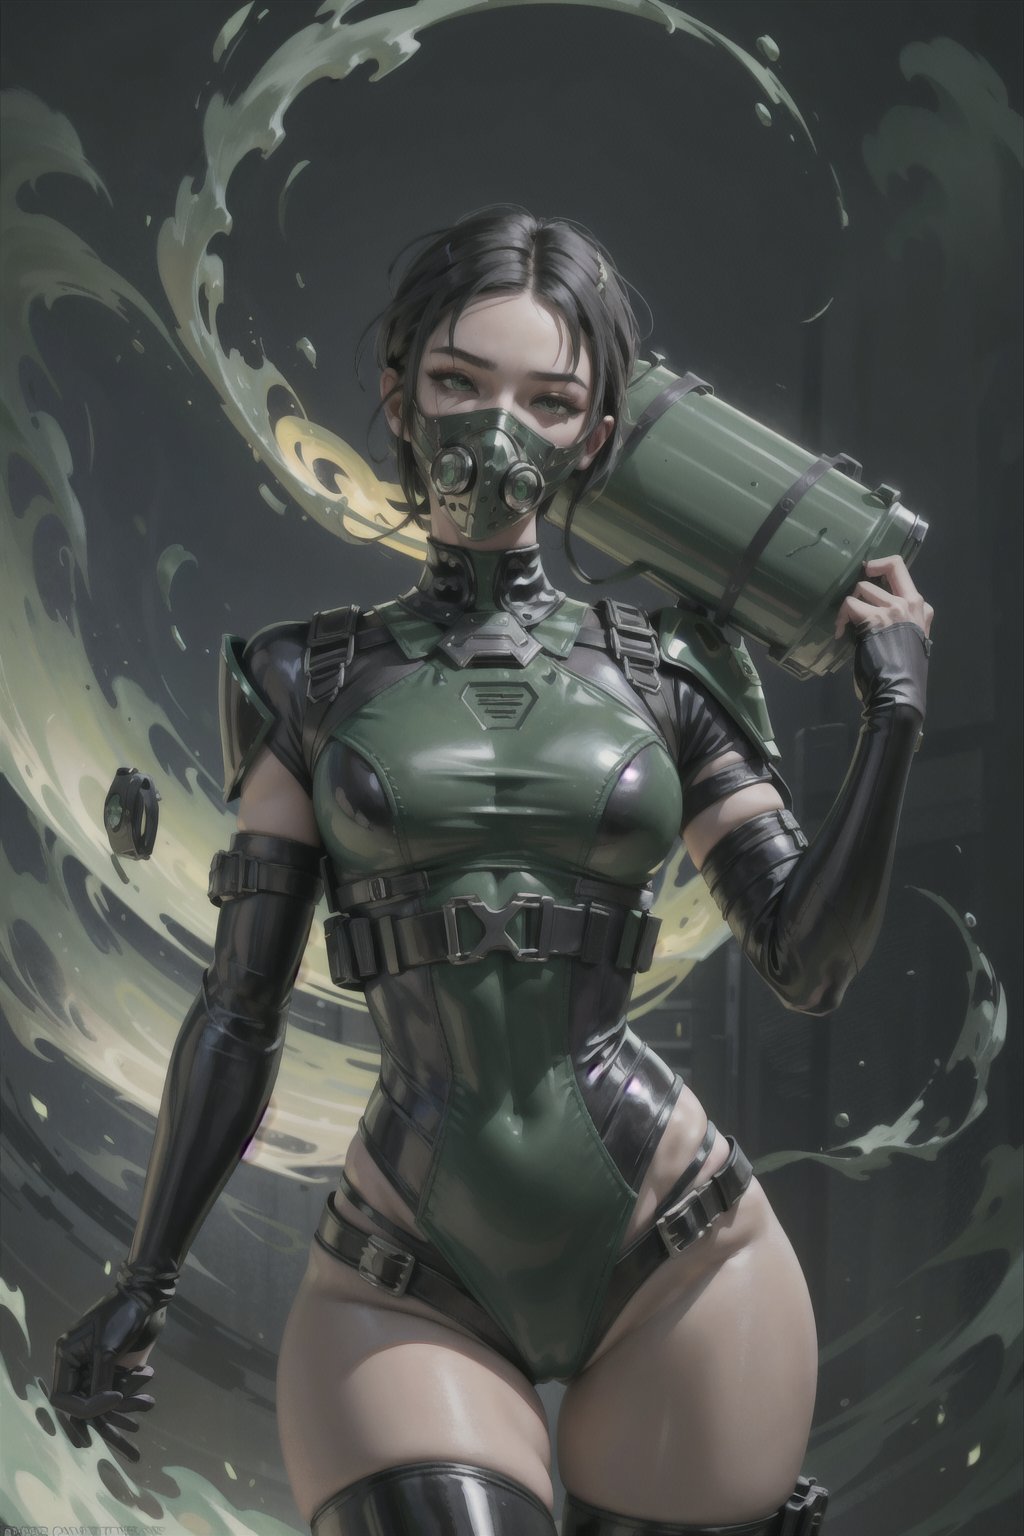 Viper is a striking character with black short hair and green eyes, wearing a green suit, black shoulder plates, and thigh-high boots. Her mask turns into a gas mask during her ultimate ability, and she carries a container of toxins on her back